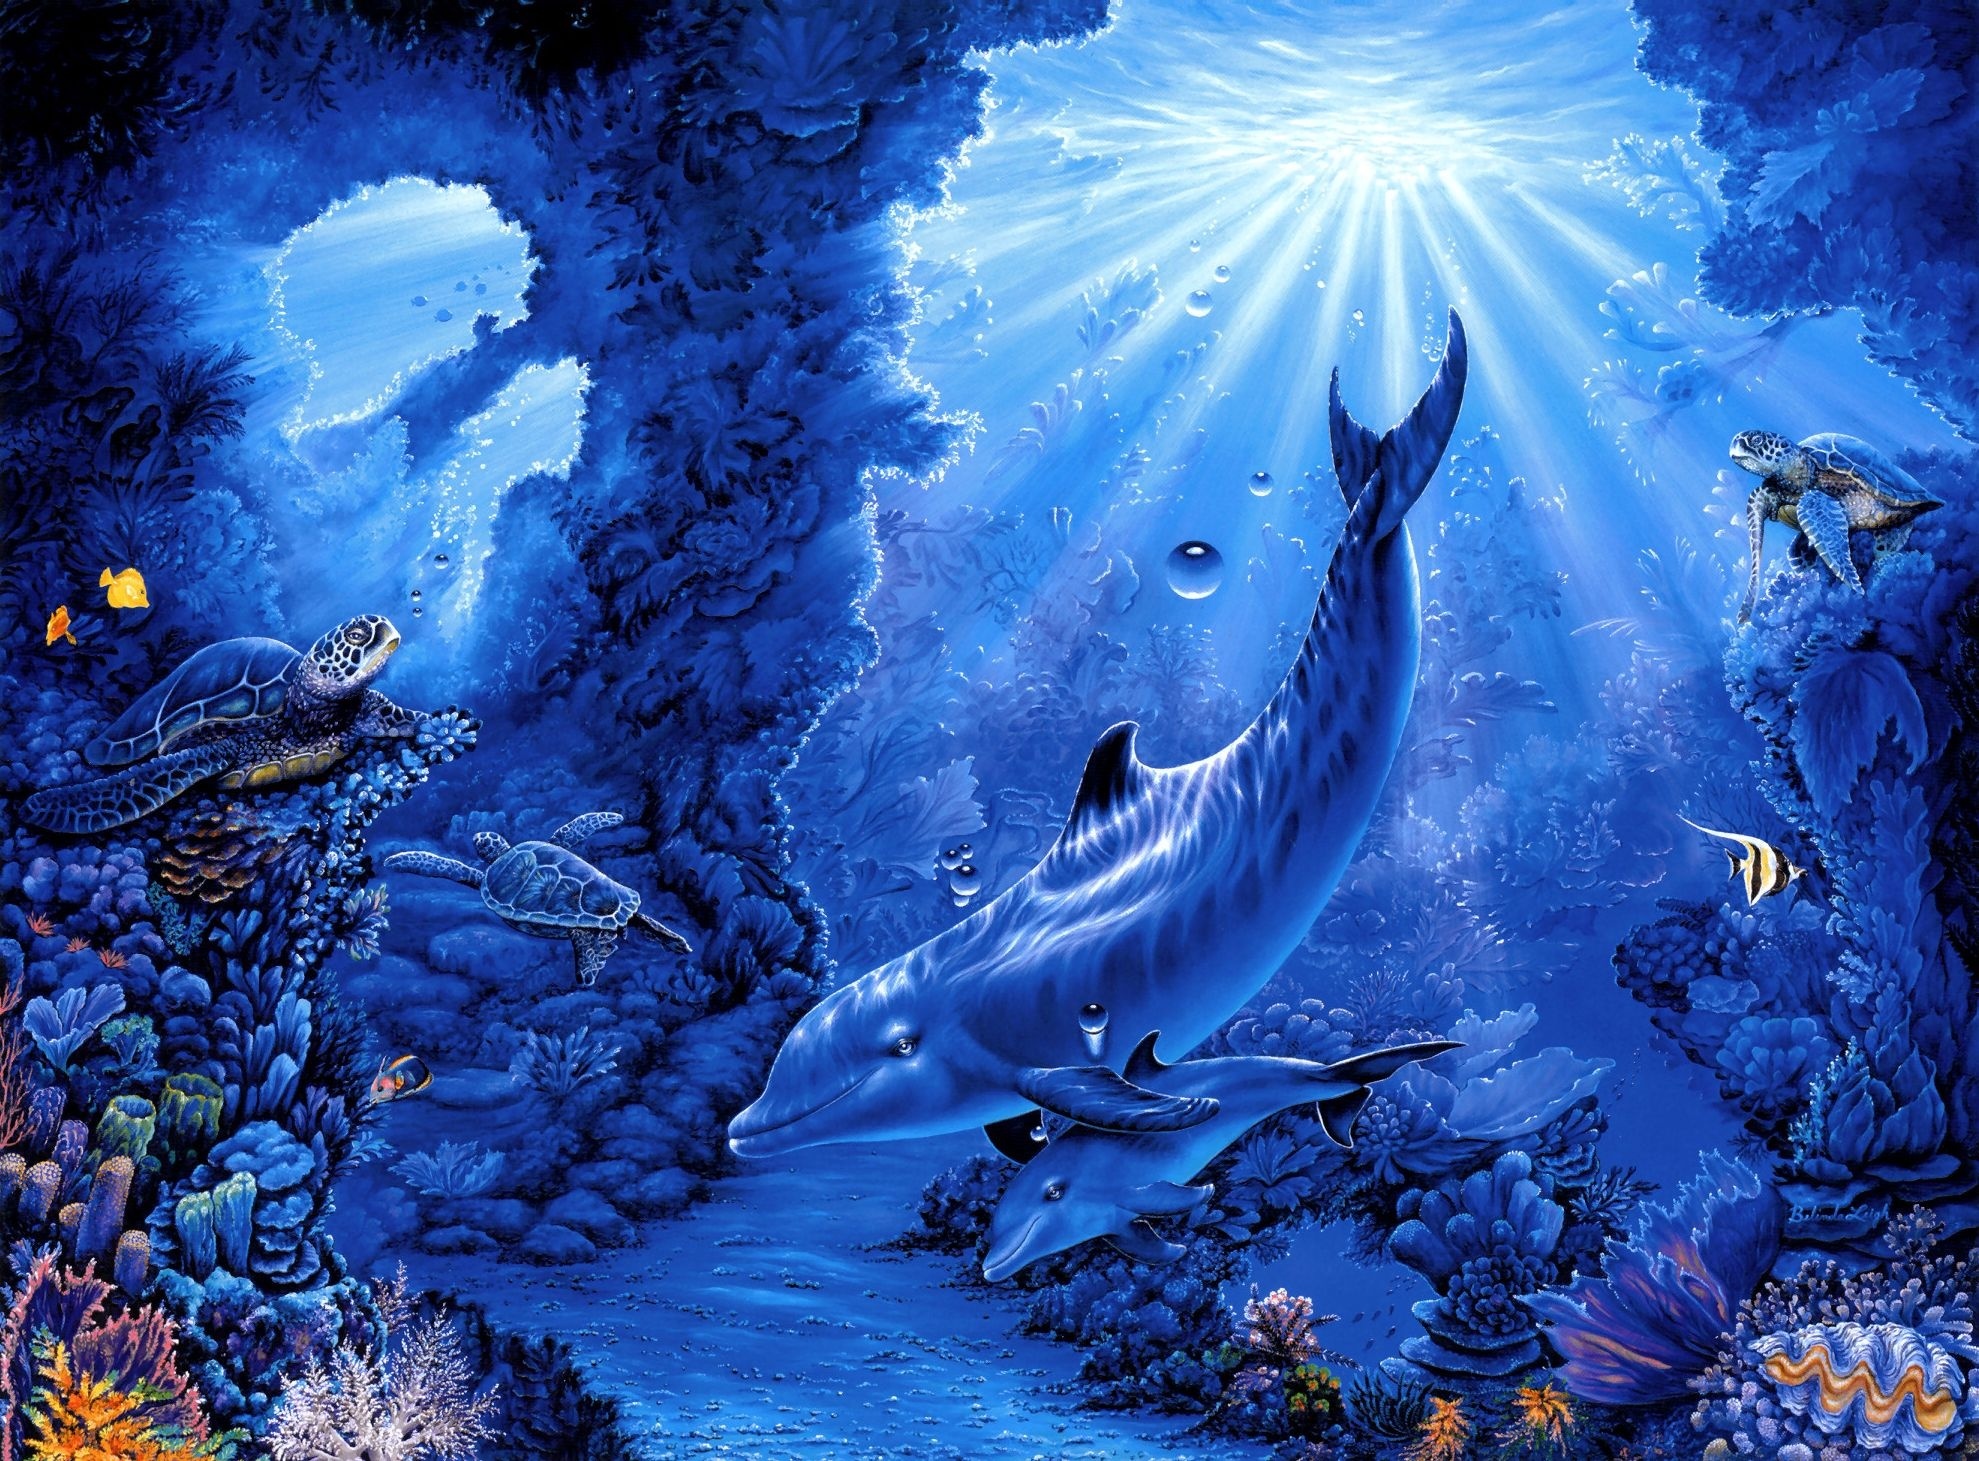 belinda, Leigh, Seabed, Turtles, Fish, Corals, Rays, Art, Dolphins, Dolphin, Sea, Ocean, Underwater Wallpaper